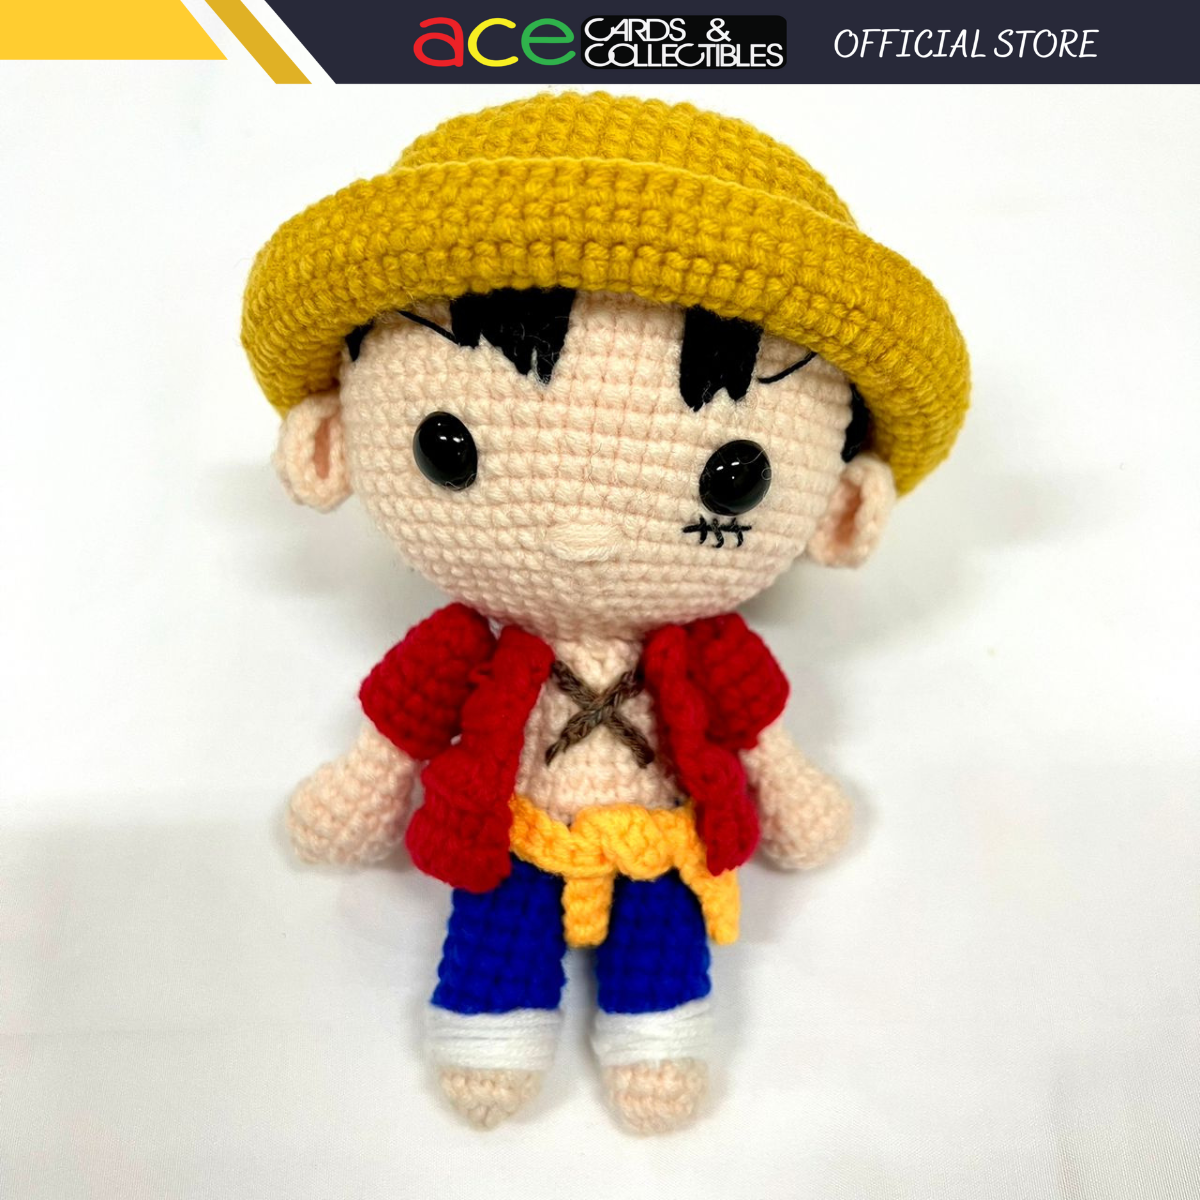 Fan Made One Piece Plush "Luffy" Keychain-Fan Made-Ace Cards & Collectibles